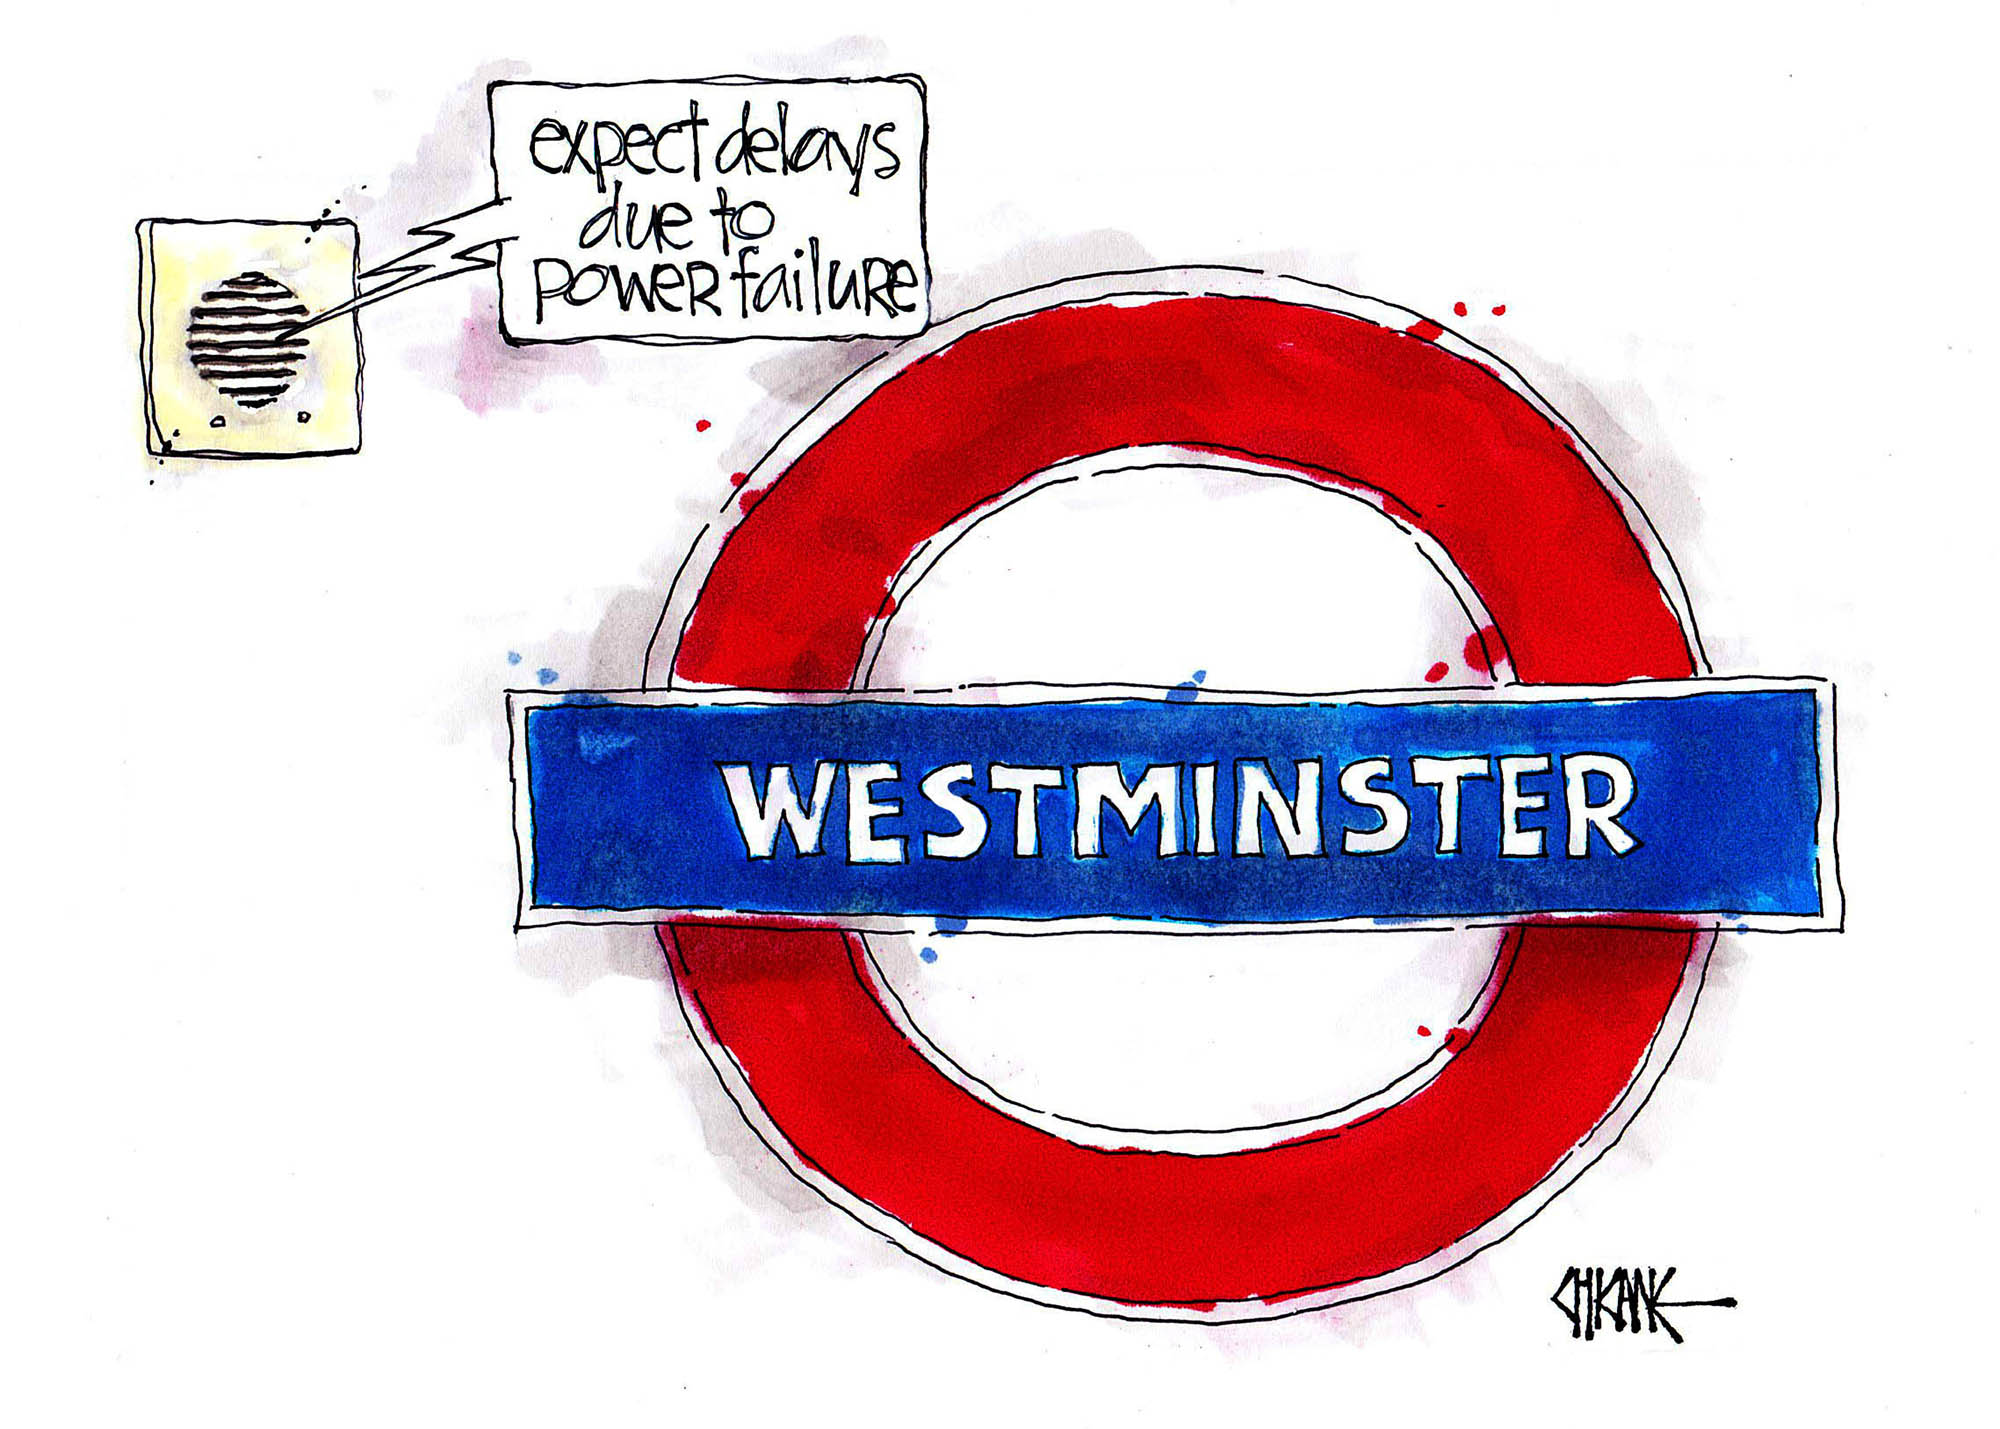 Westminster tube station sign. Expect delays due to power failure. Cartoon by Chicane.